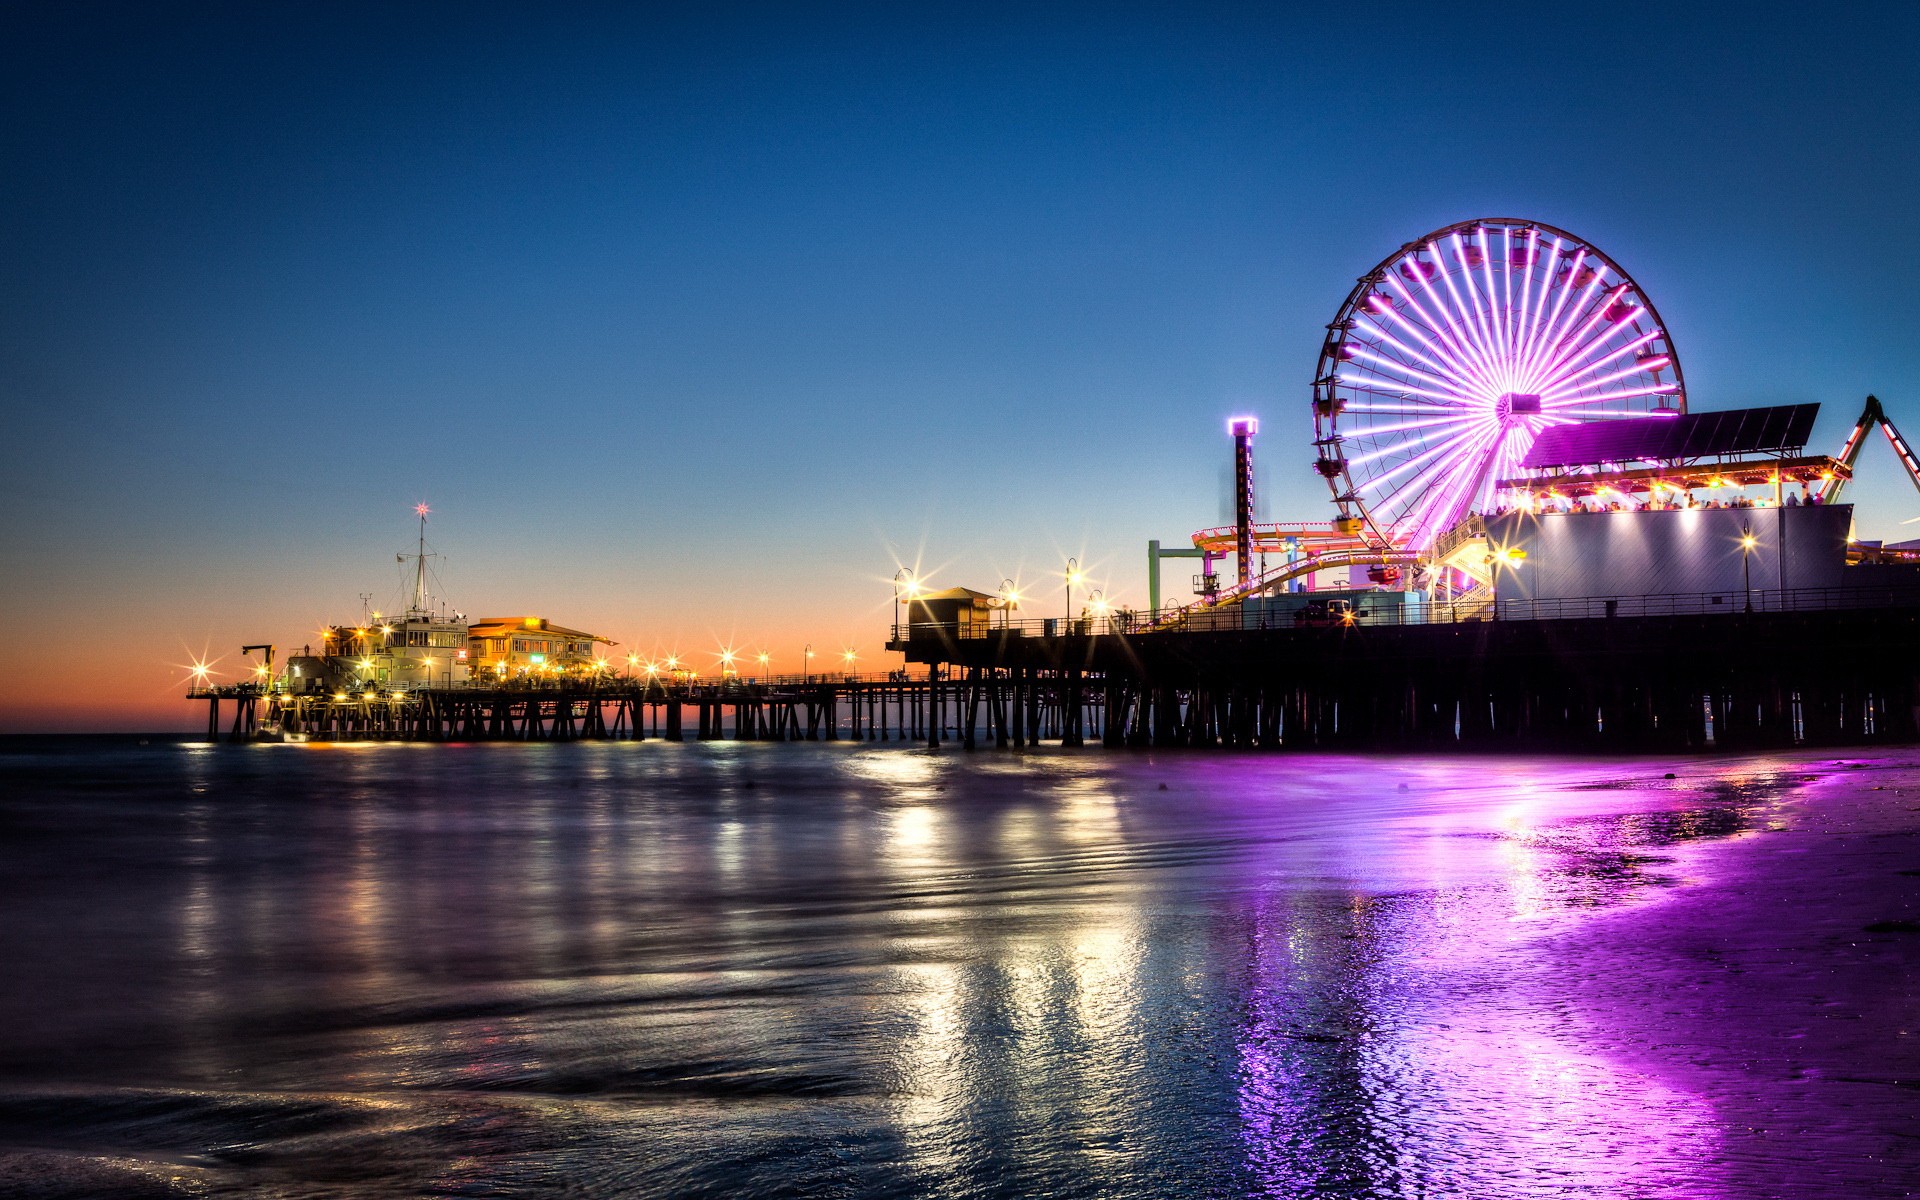 Los Angeles beach at night 1920 x 1200 Locality Photography 1920x1200